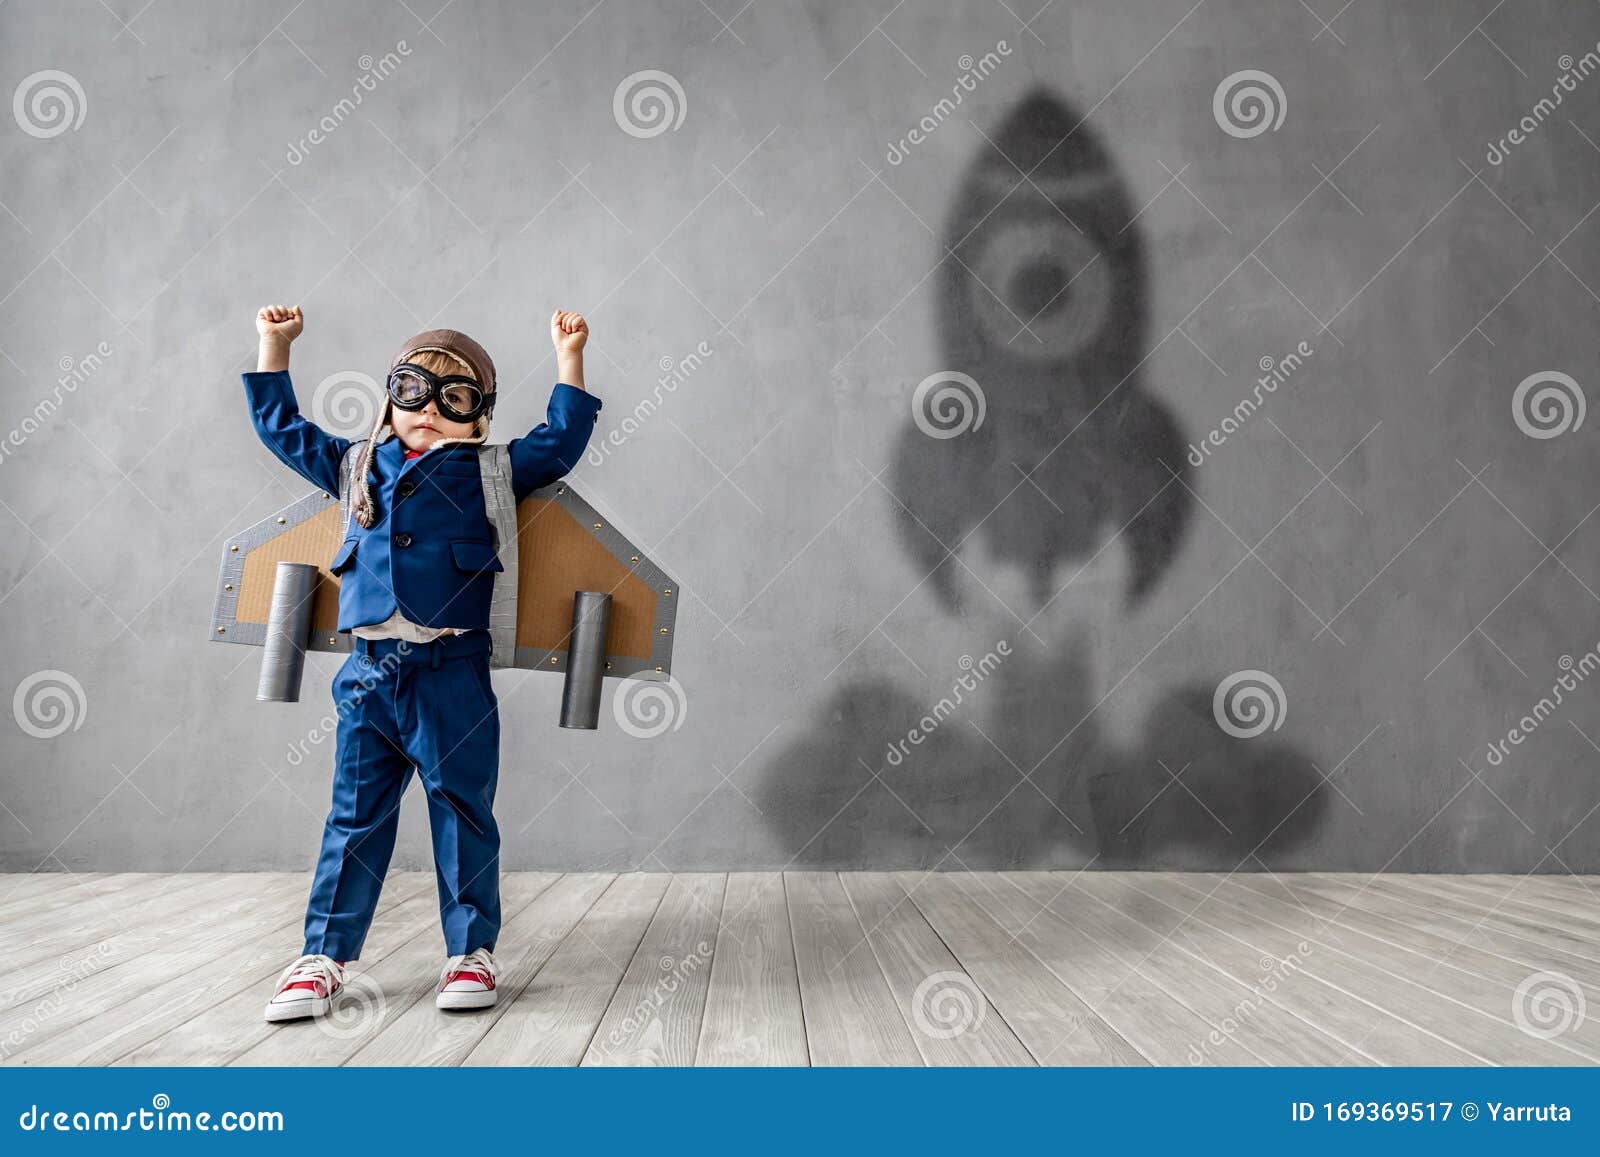 happy child wants to fly. imagination, freedom and motivation concept